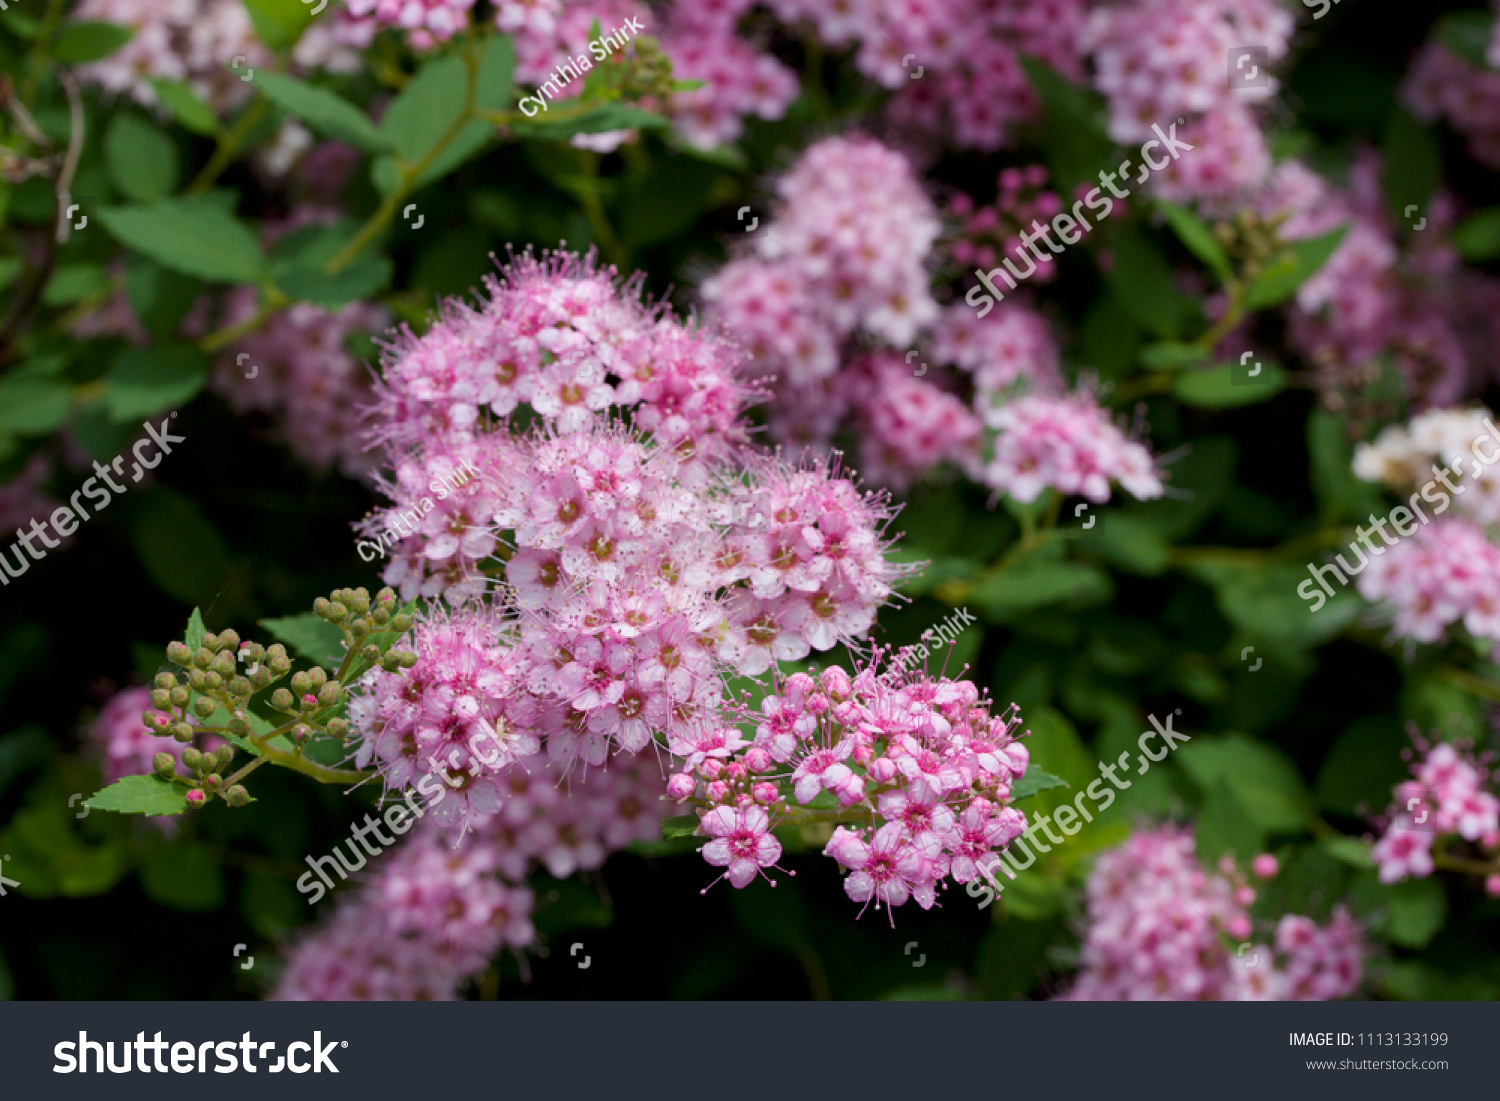 Close up macro view of newly blossoming tiny bright pink compact spirea (Spiraea) flower clusters #1113133199